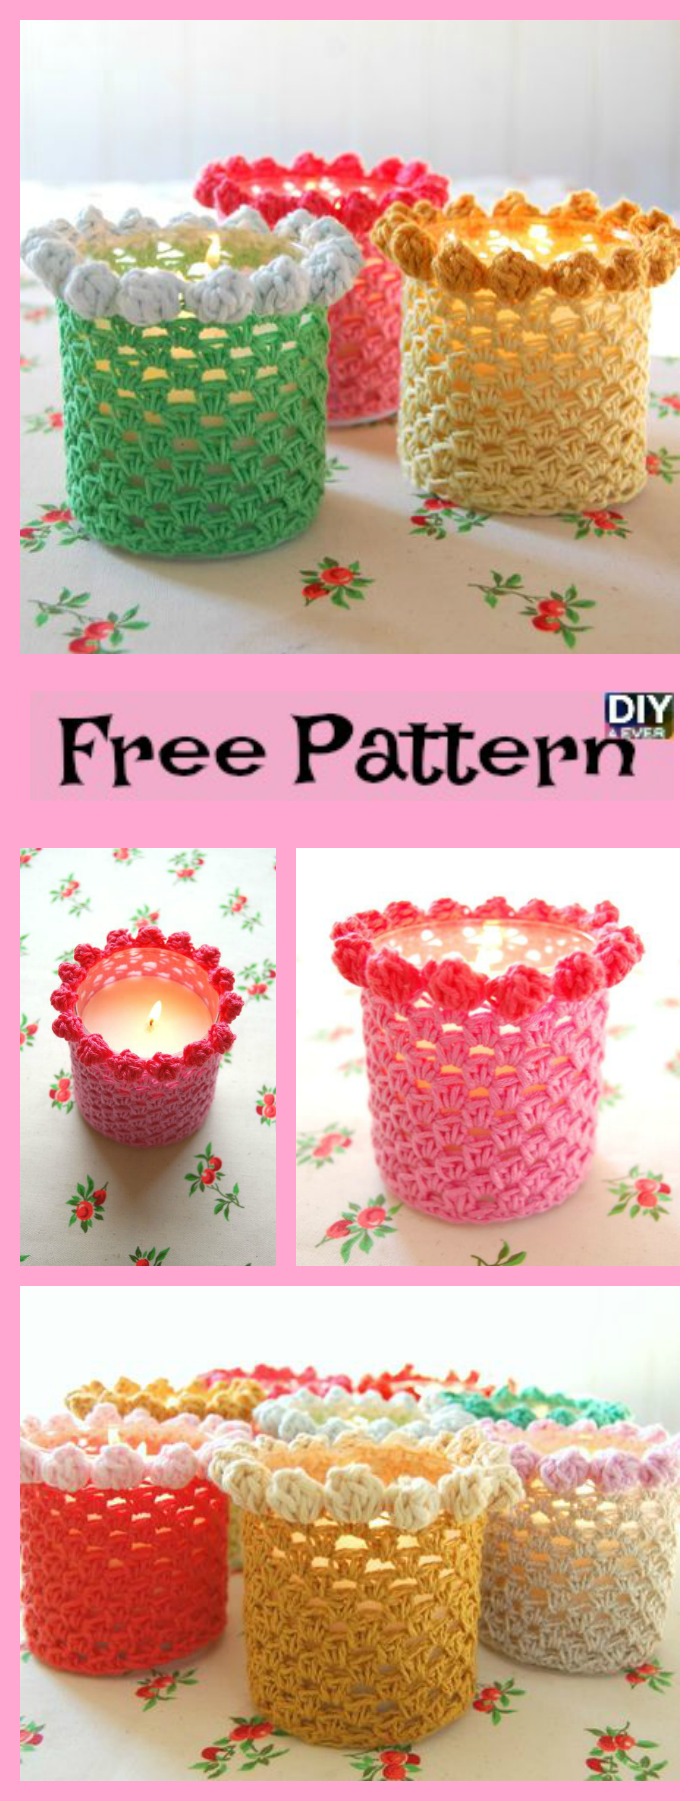 diy4ever- Bobbled Crochet Candle Holder Cover - Free Pattern 